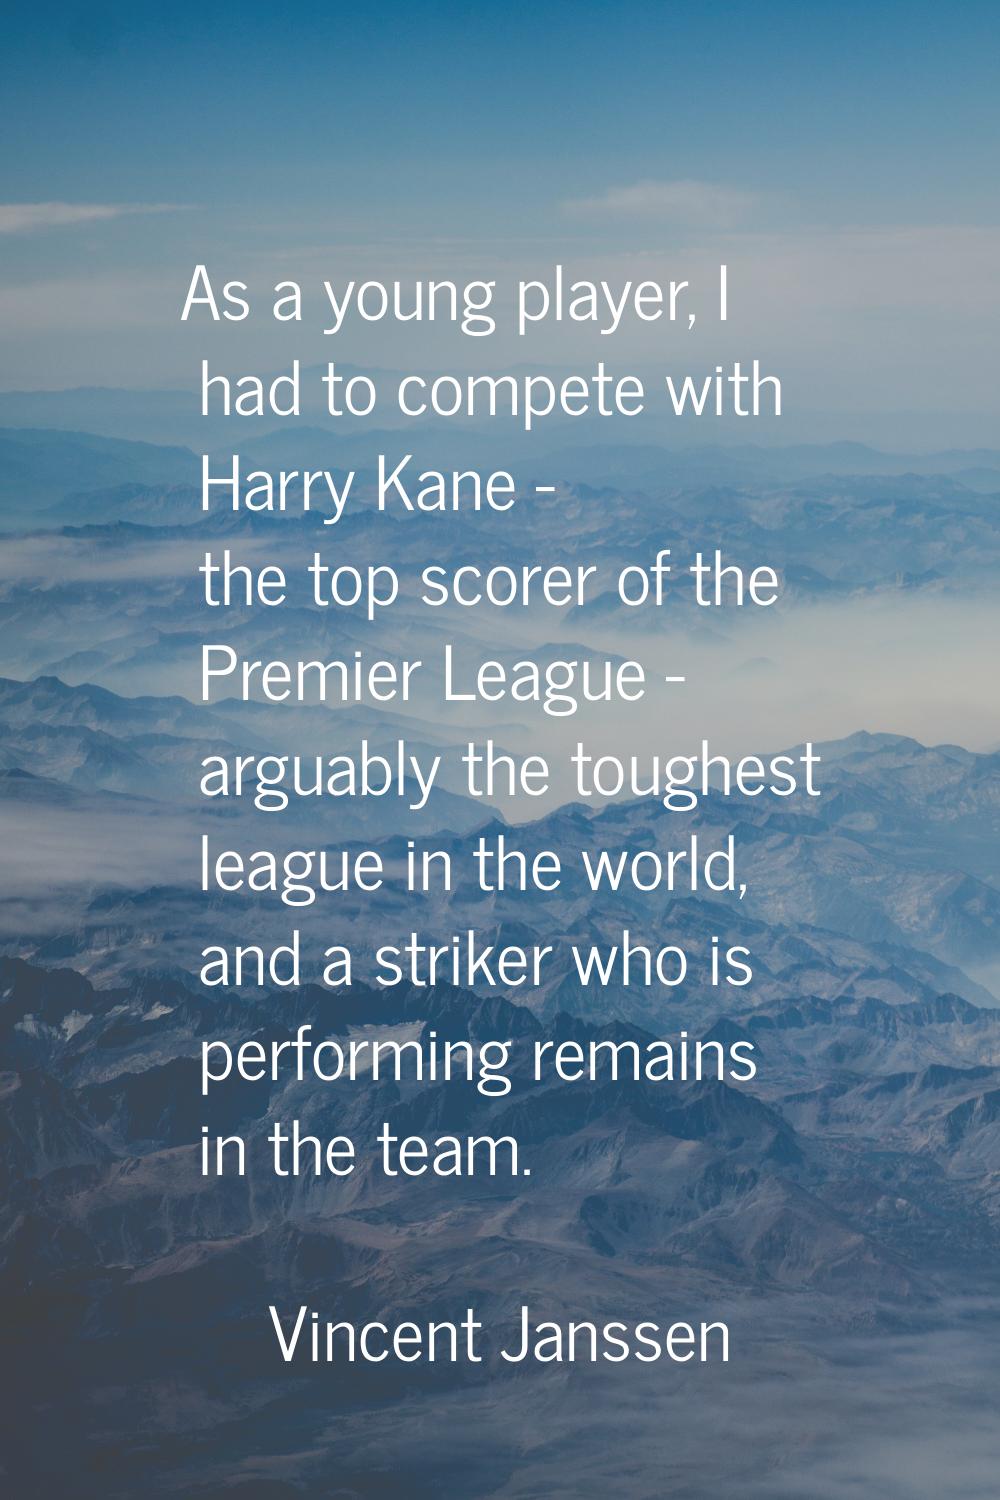 As a young player, I had to compete with Harry Kane - the top scorer of the Premier League - arguab